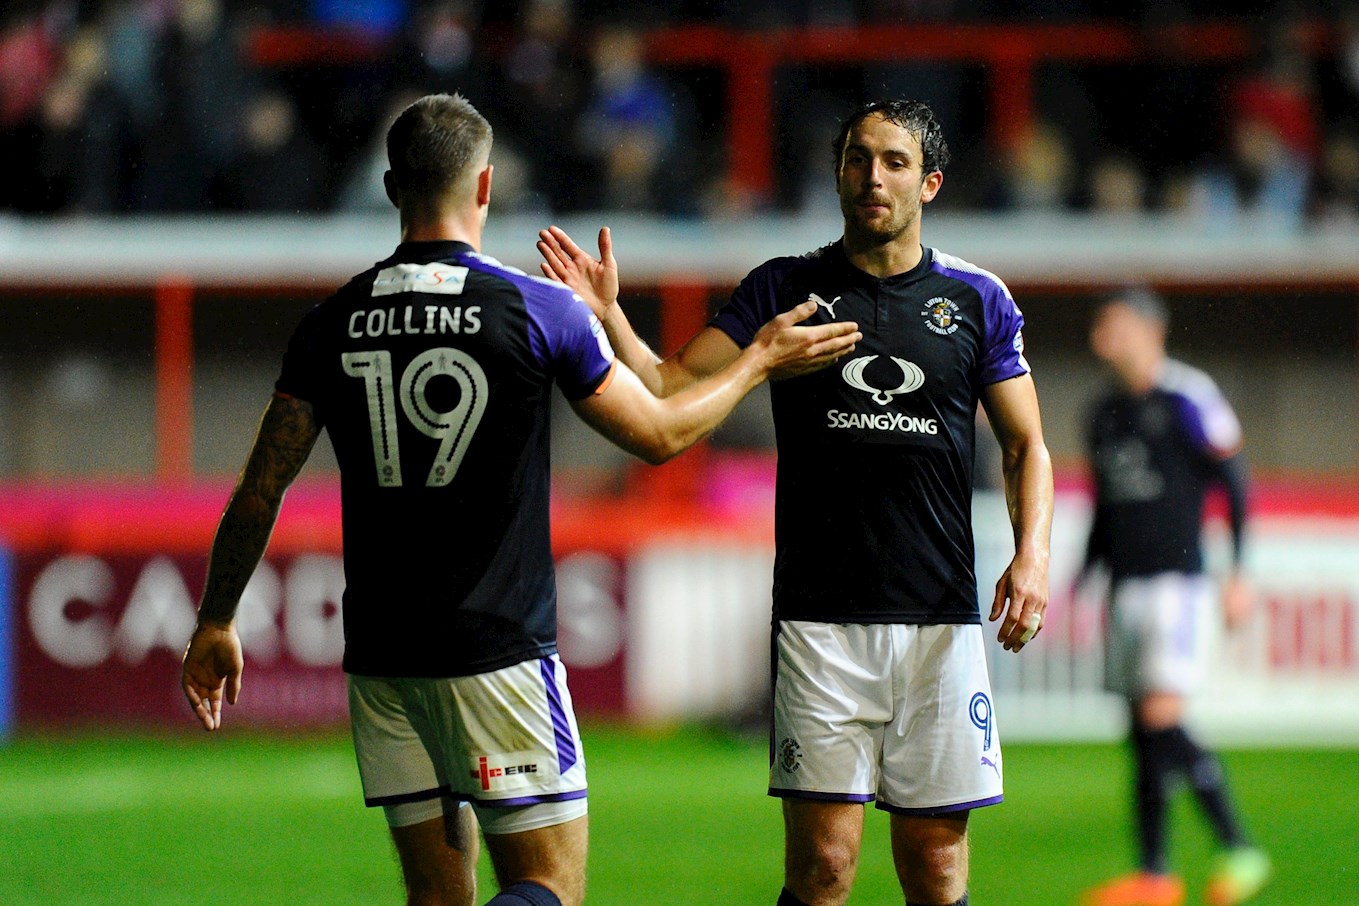 Danny Hylton and James Collins celebrate a goal at Exeter in 2017-18